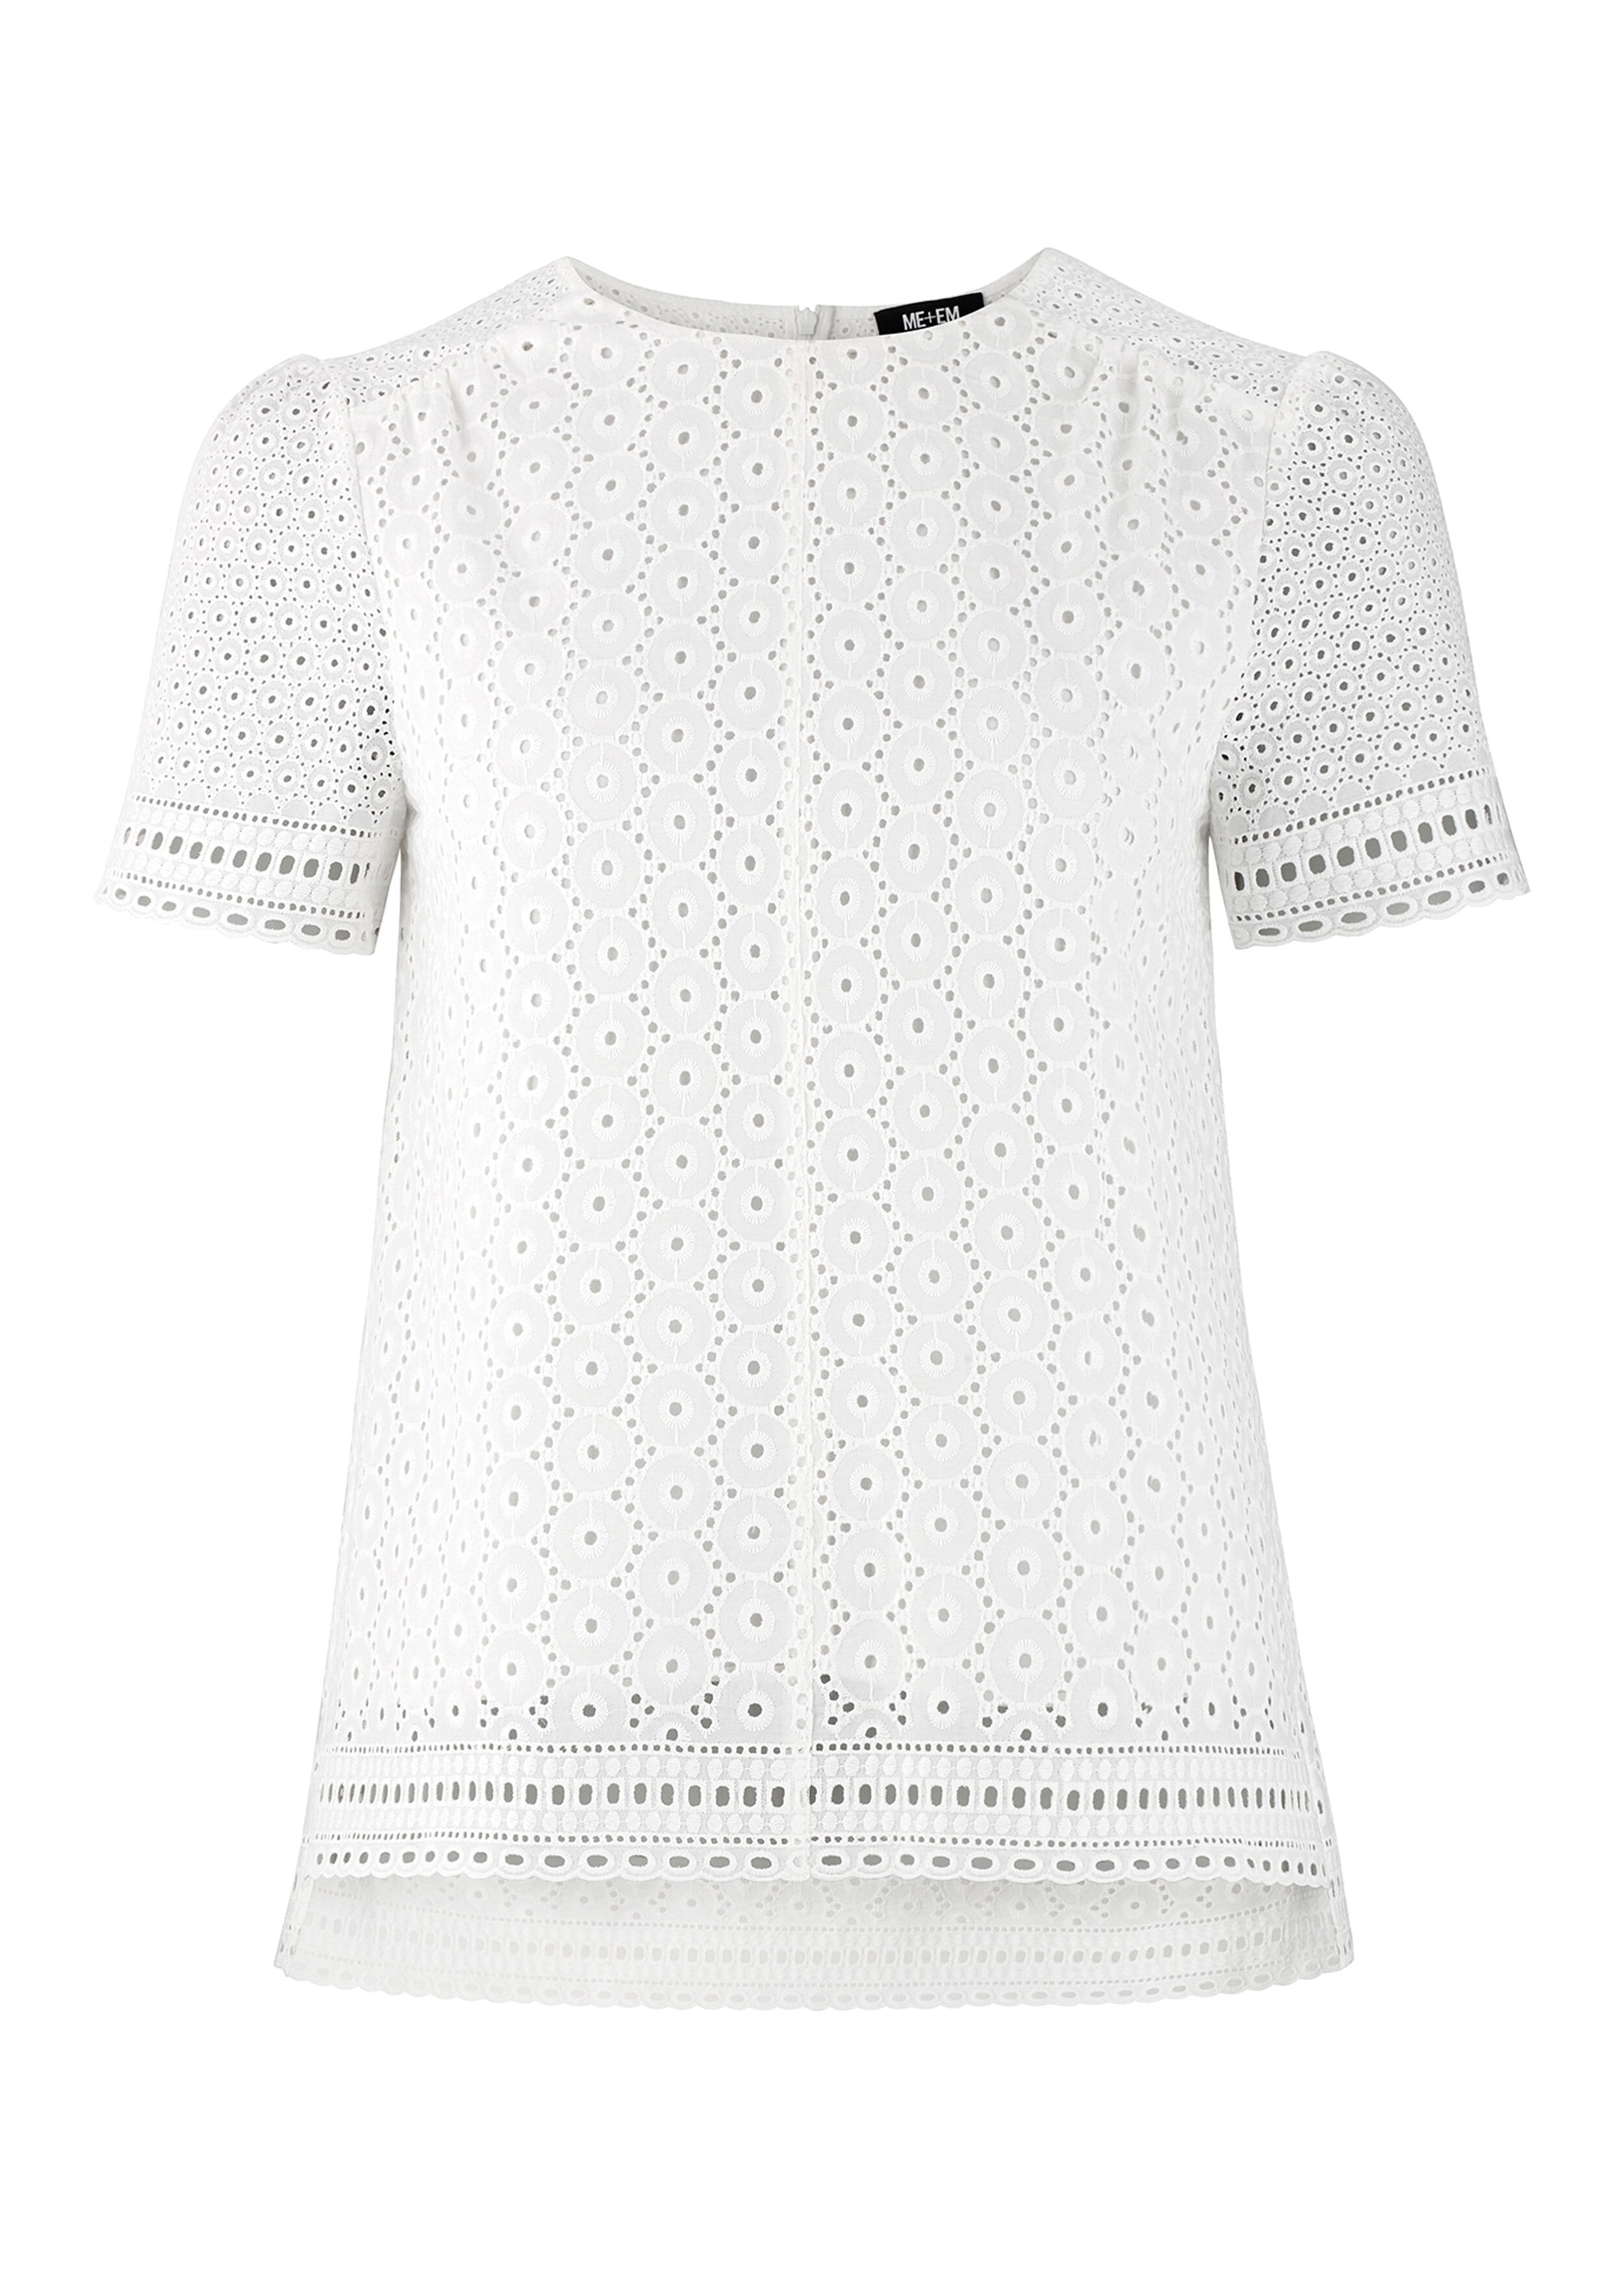 Broderie Boxy Top White